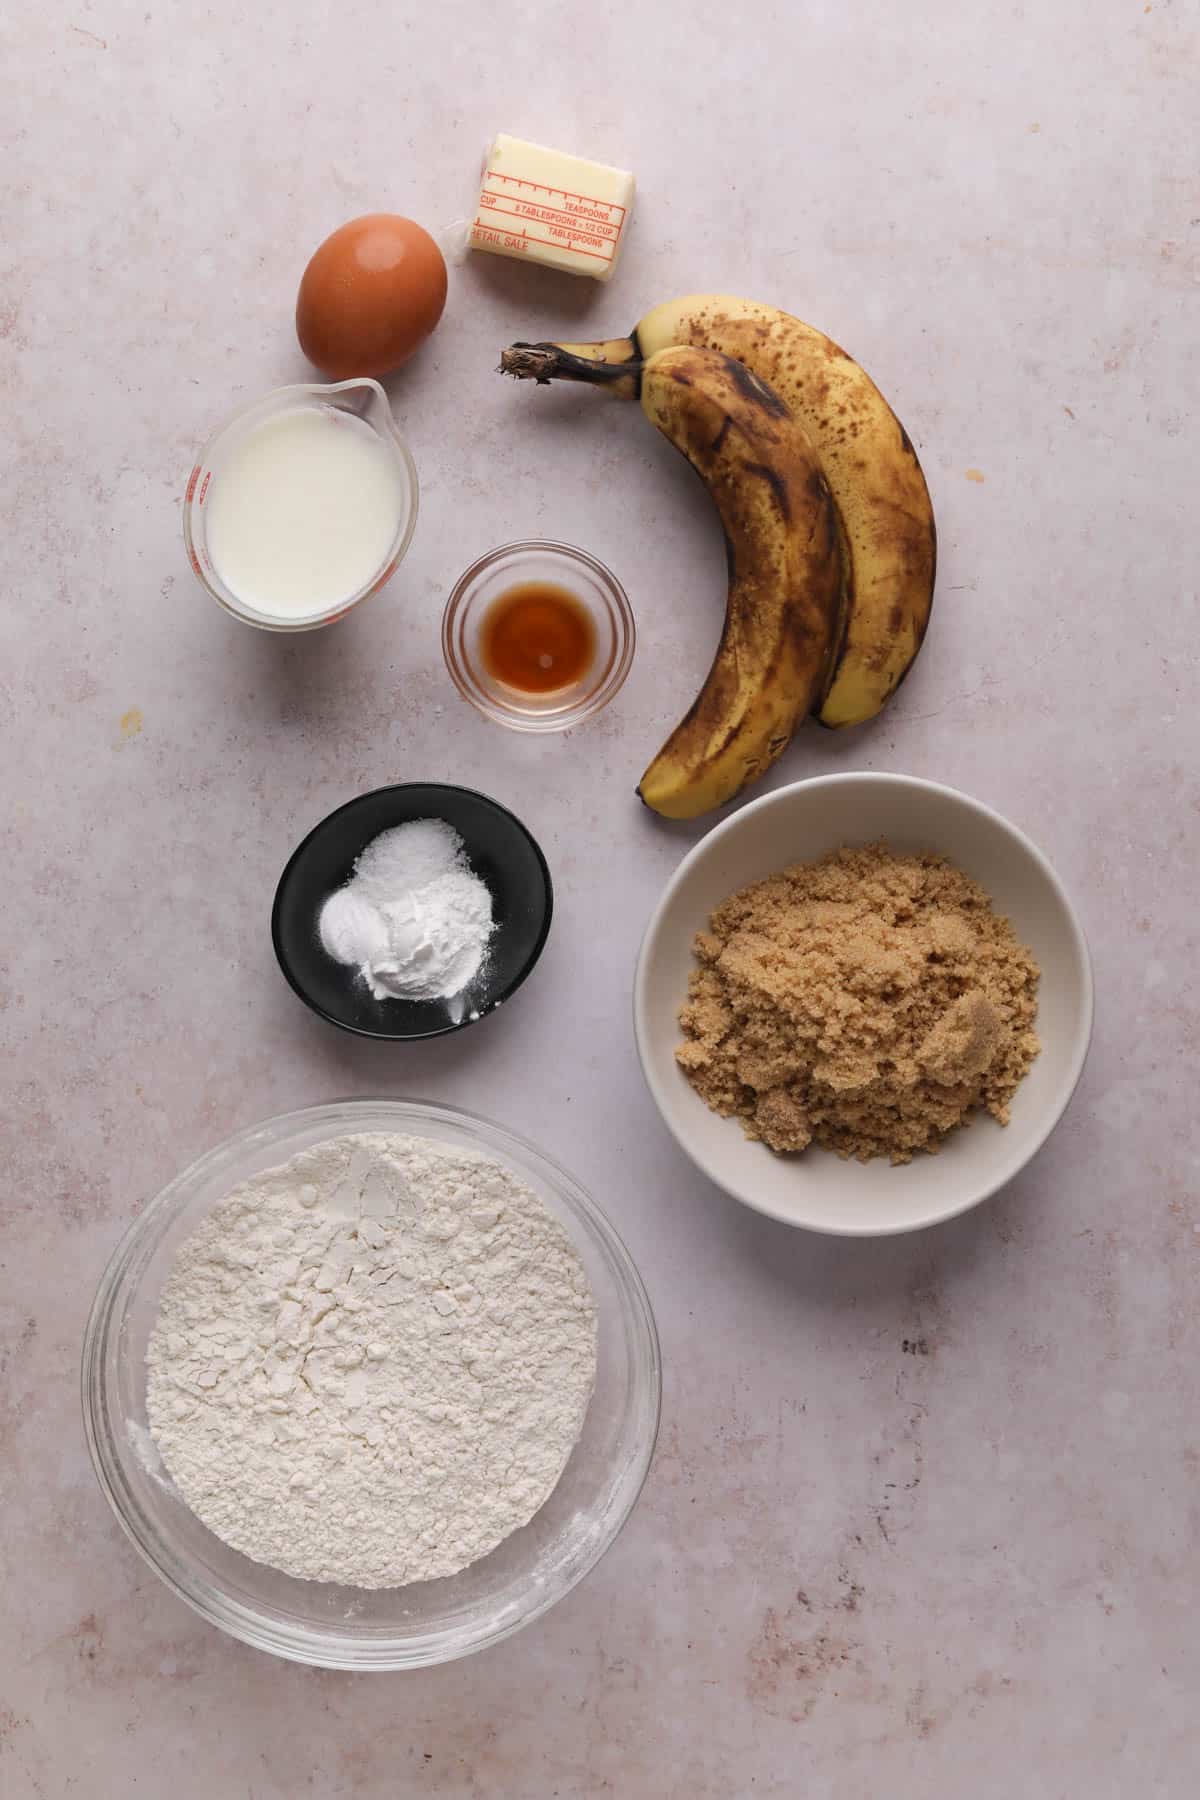 Ingredients for baked banana donuts in bowls.